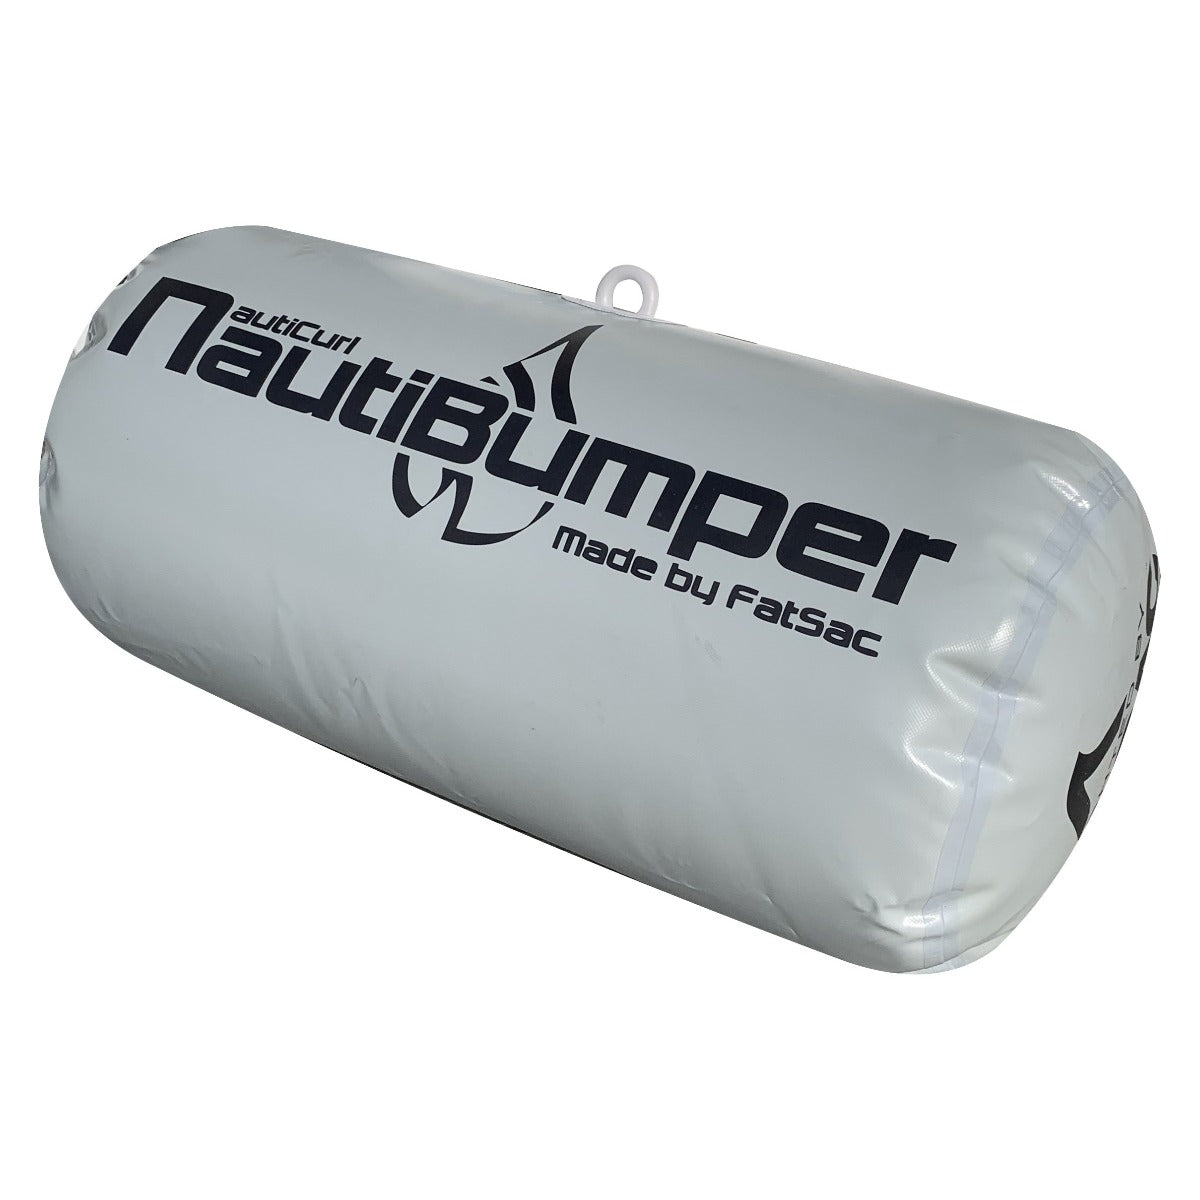 NautiBumper Party Bumper Boat Fender for tying up! NautiCurl and FatSac